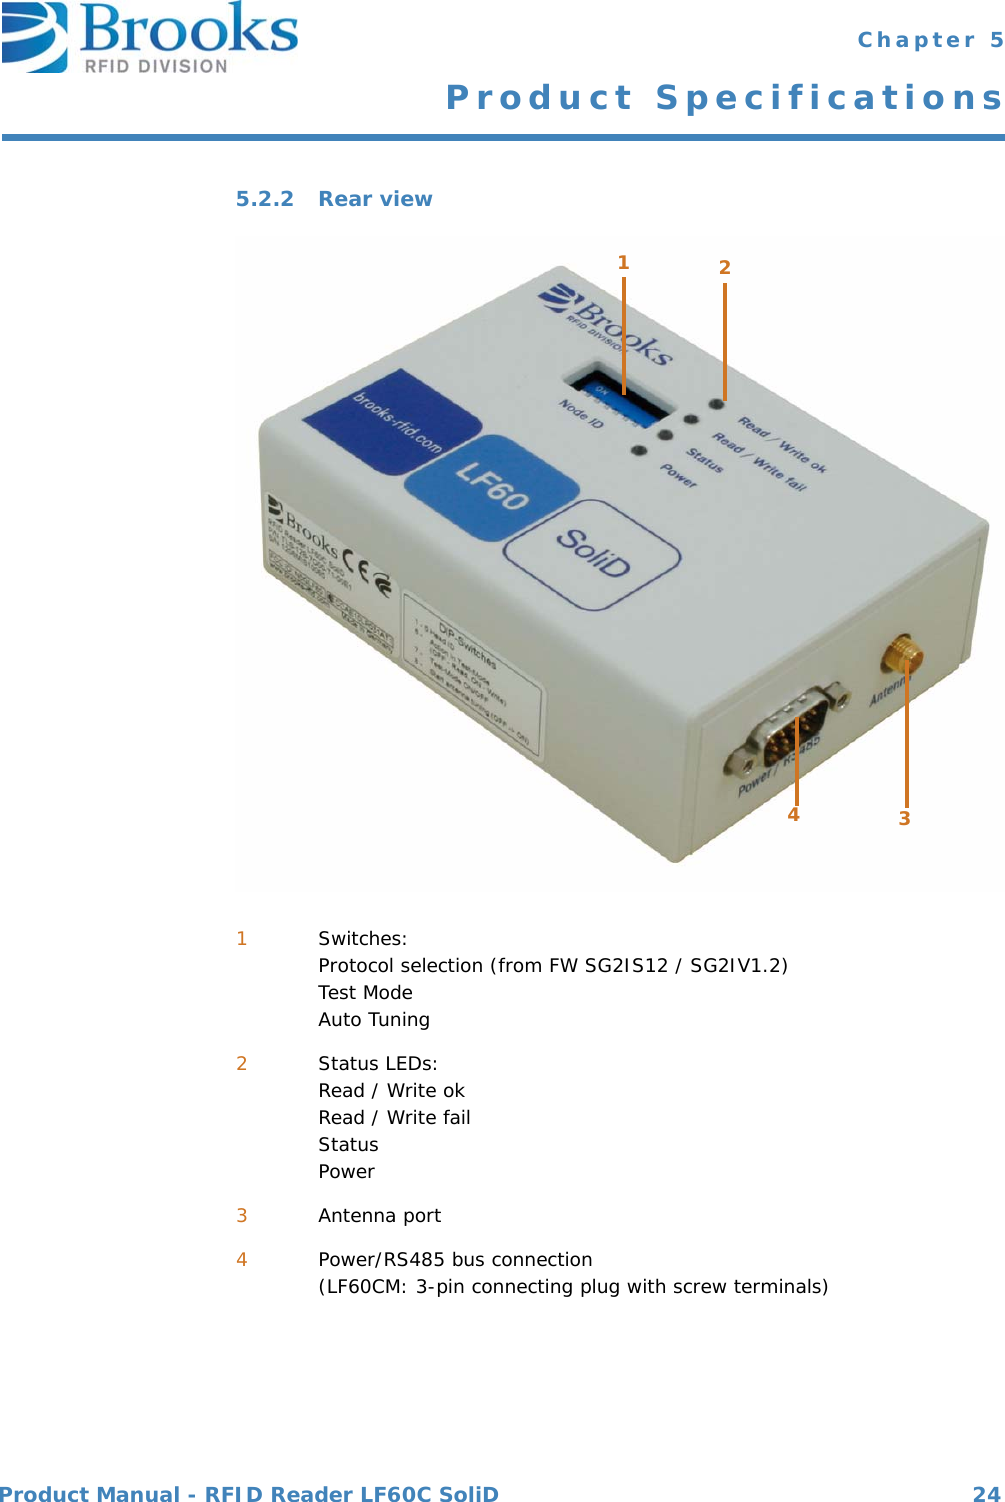 Product Manual - RFID Reader LF60C SoliD 24 Chapter 5Product Specifications5.2.2 Rear view1Switches:Protocol selection (from FW SG2IS12 / SG2IV1.2)Test ModeAuto Tuning2Status LEDs:Read / Write okRead / Write failStatusPower3Antenna port4Power/RS485 bus connection(LF60CM: 3-pin connecting plug with screw terminals)1324